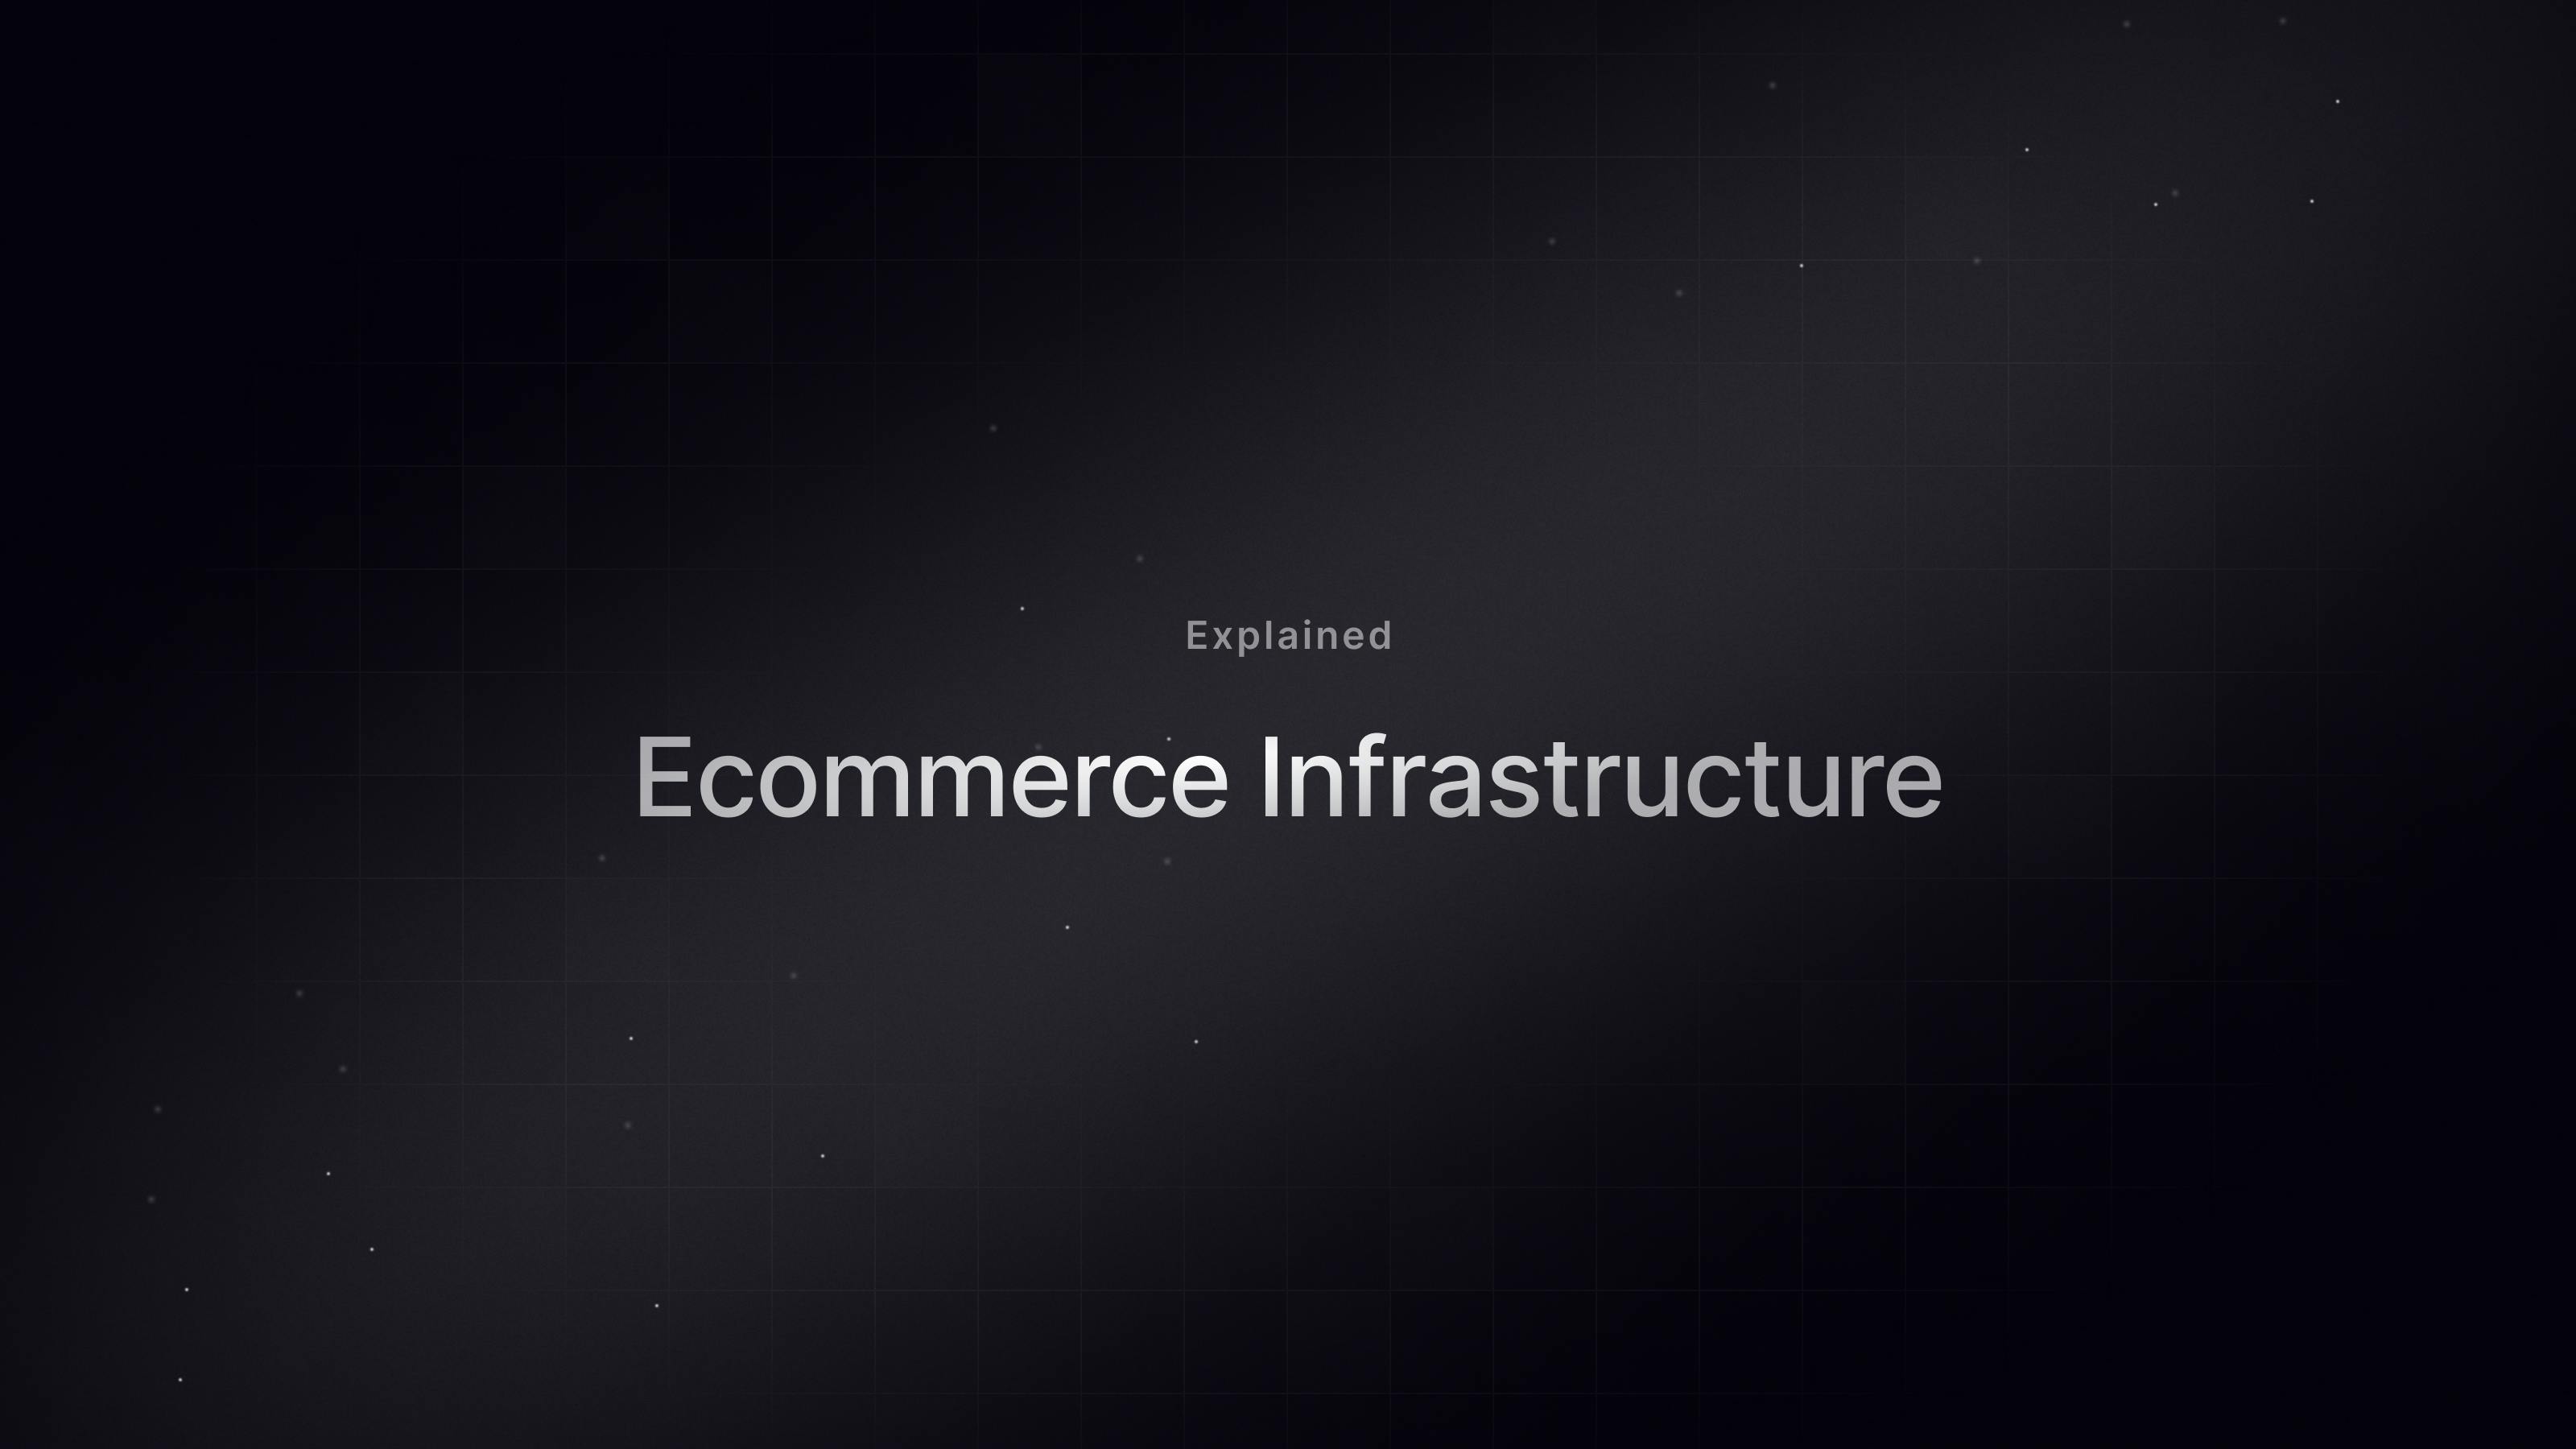 Ecommerce Infrastructure: What it is